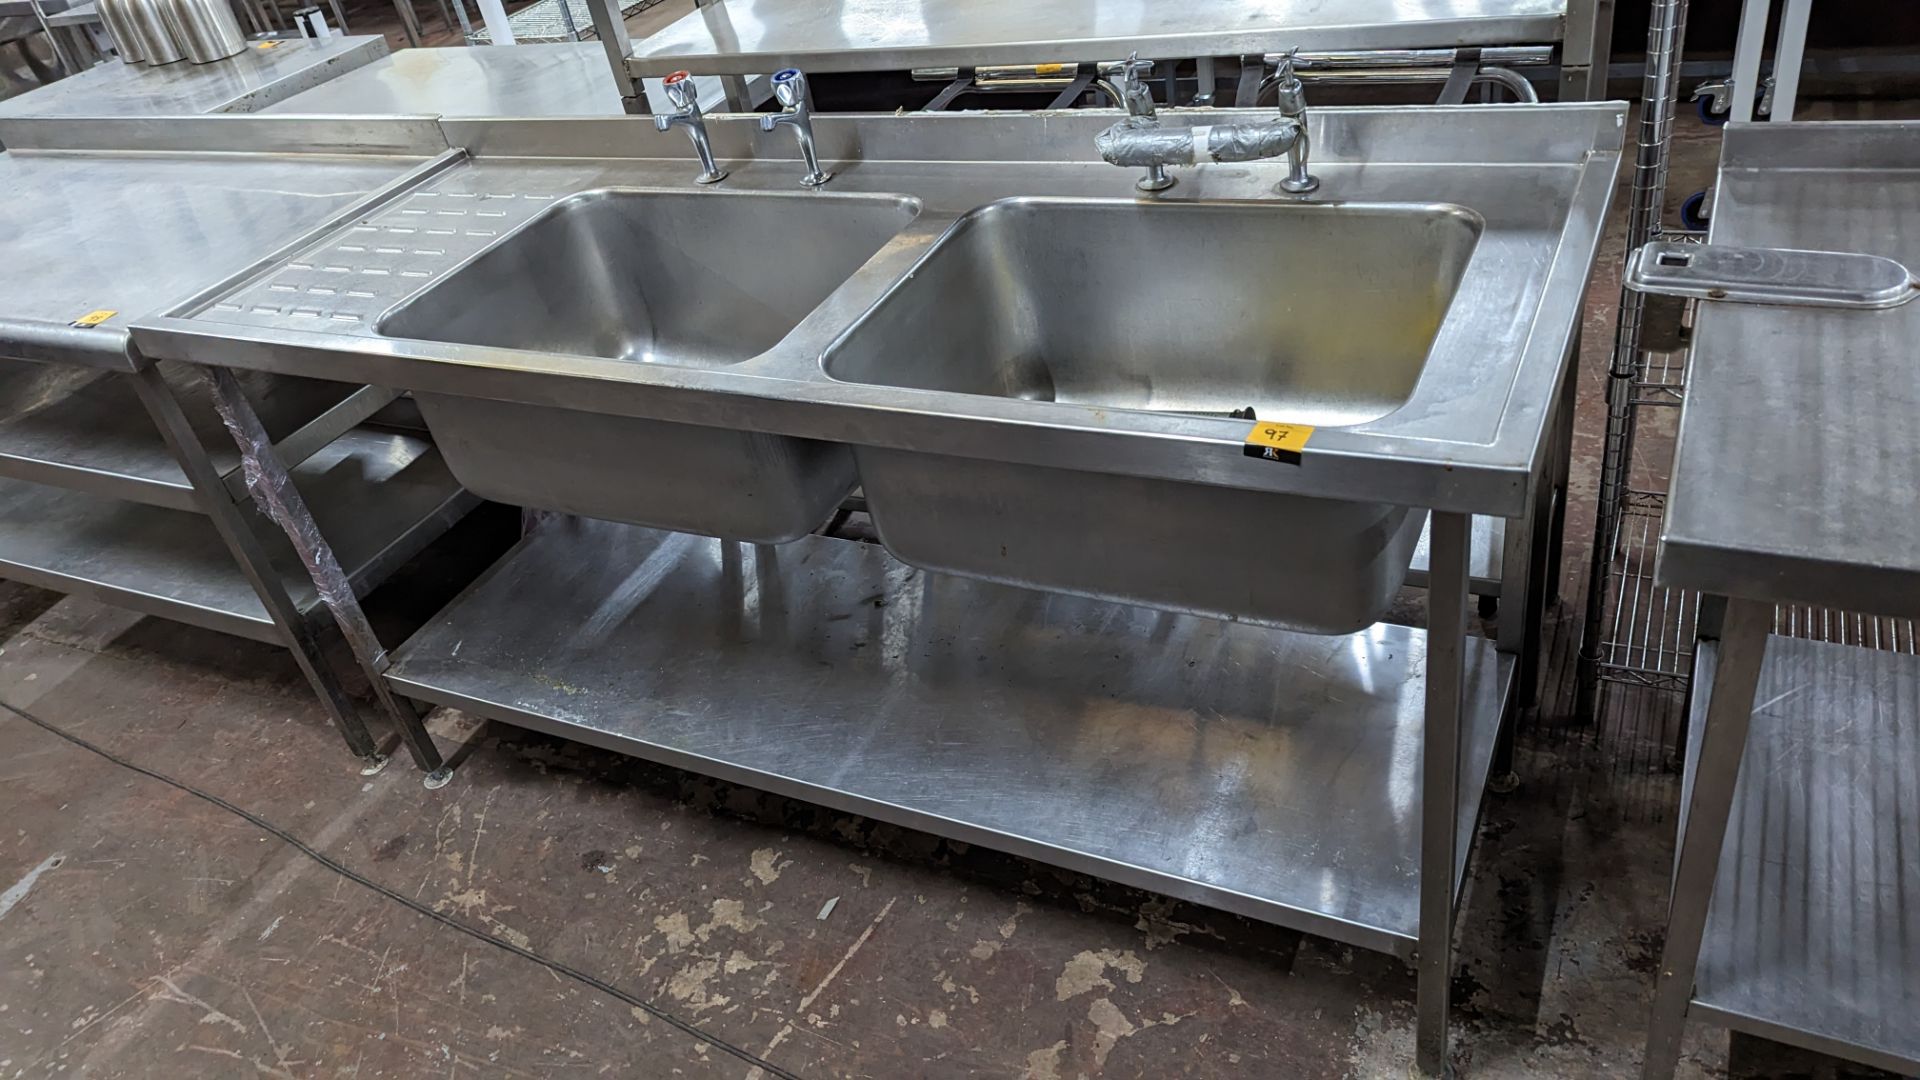 Stainless steel floor standing twin bowl sink arrangement with drainer to the left - Image 2 of 5